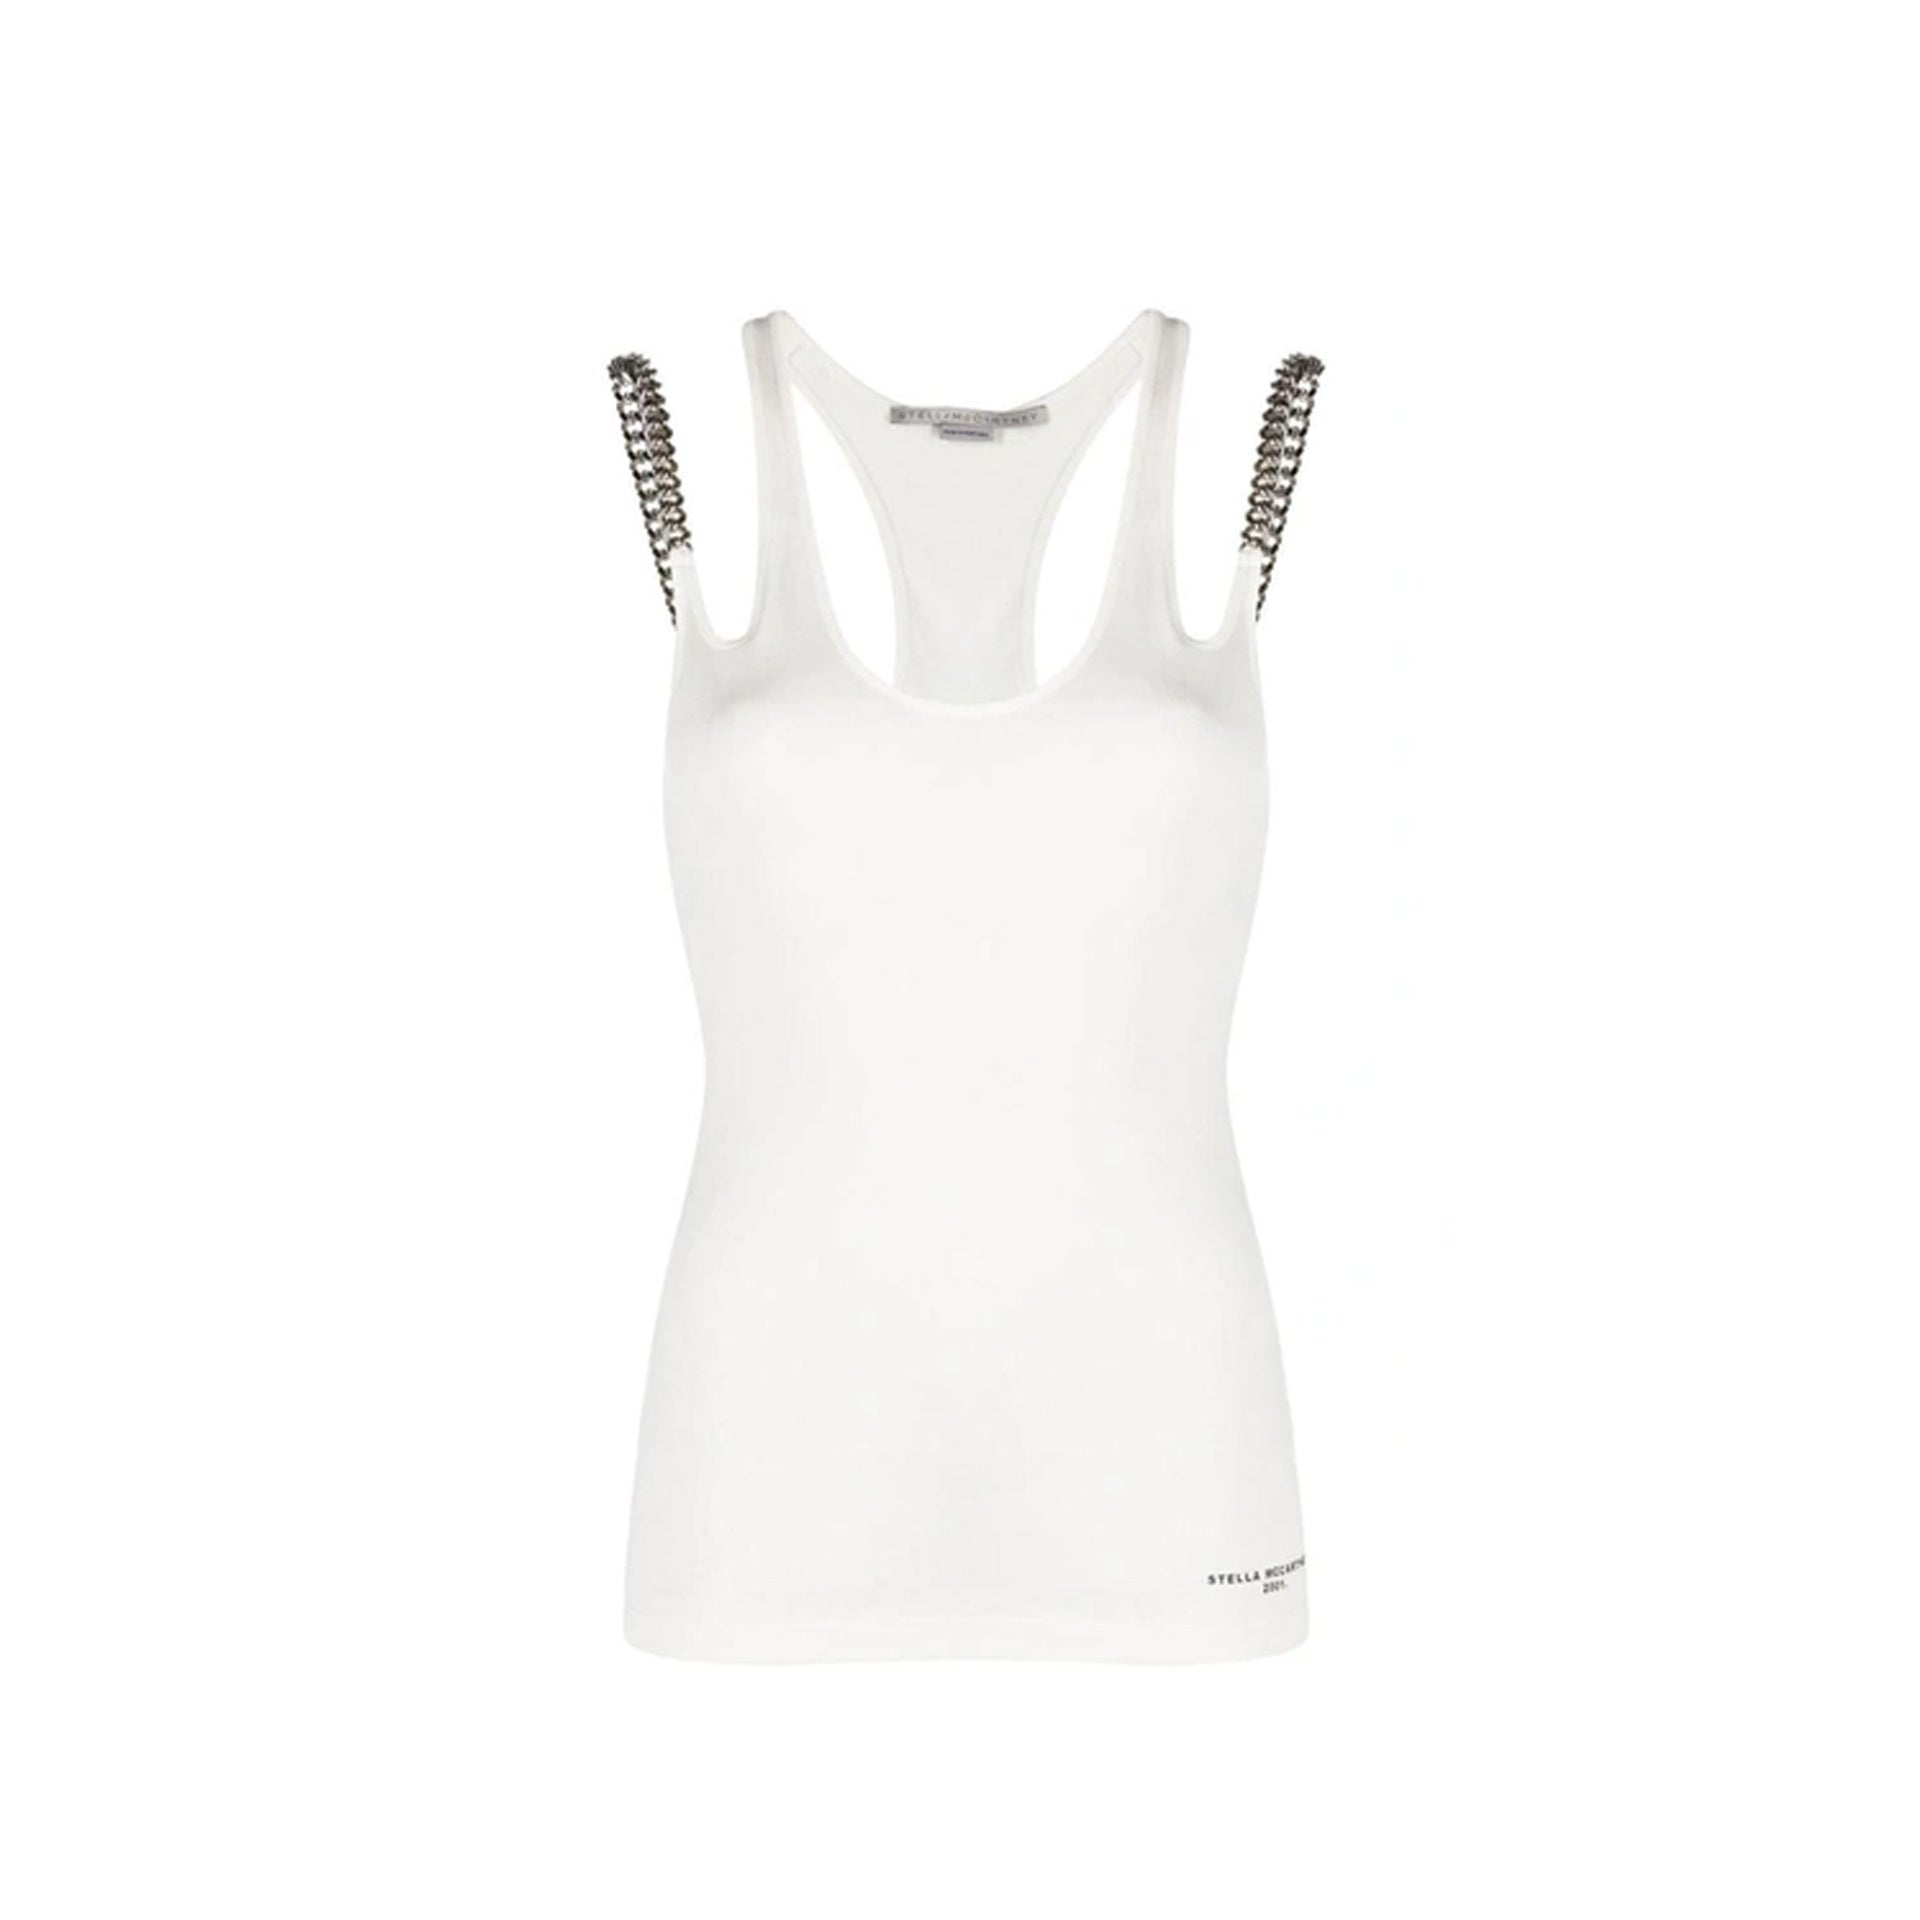 STELLA-MCCARTNEY-OUTLET-SALE-STELLA-MCCARTNEY-Falabella-Chain-Top-Shirts-WHITE-36-ARCHIVE-COLLECTION.jpg